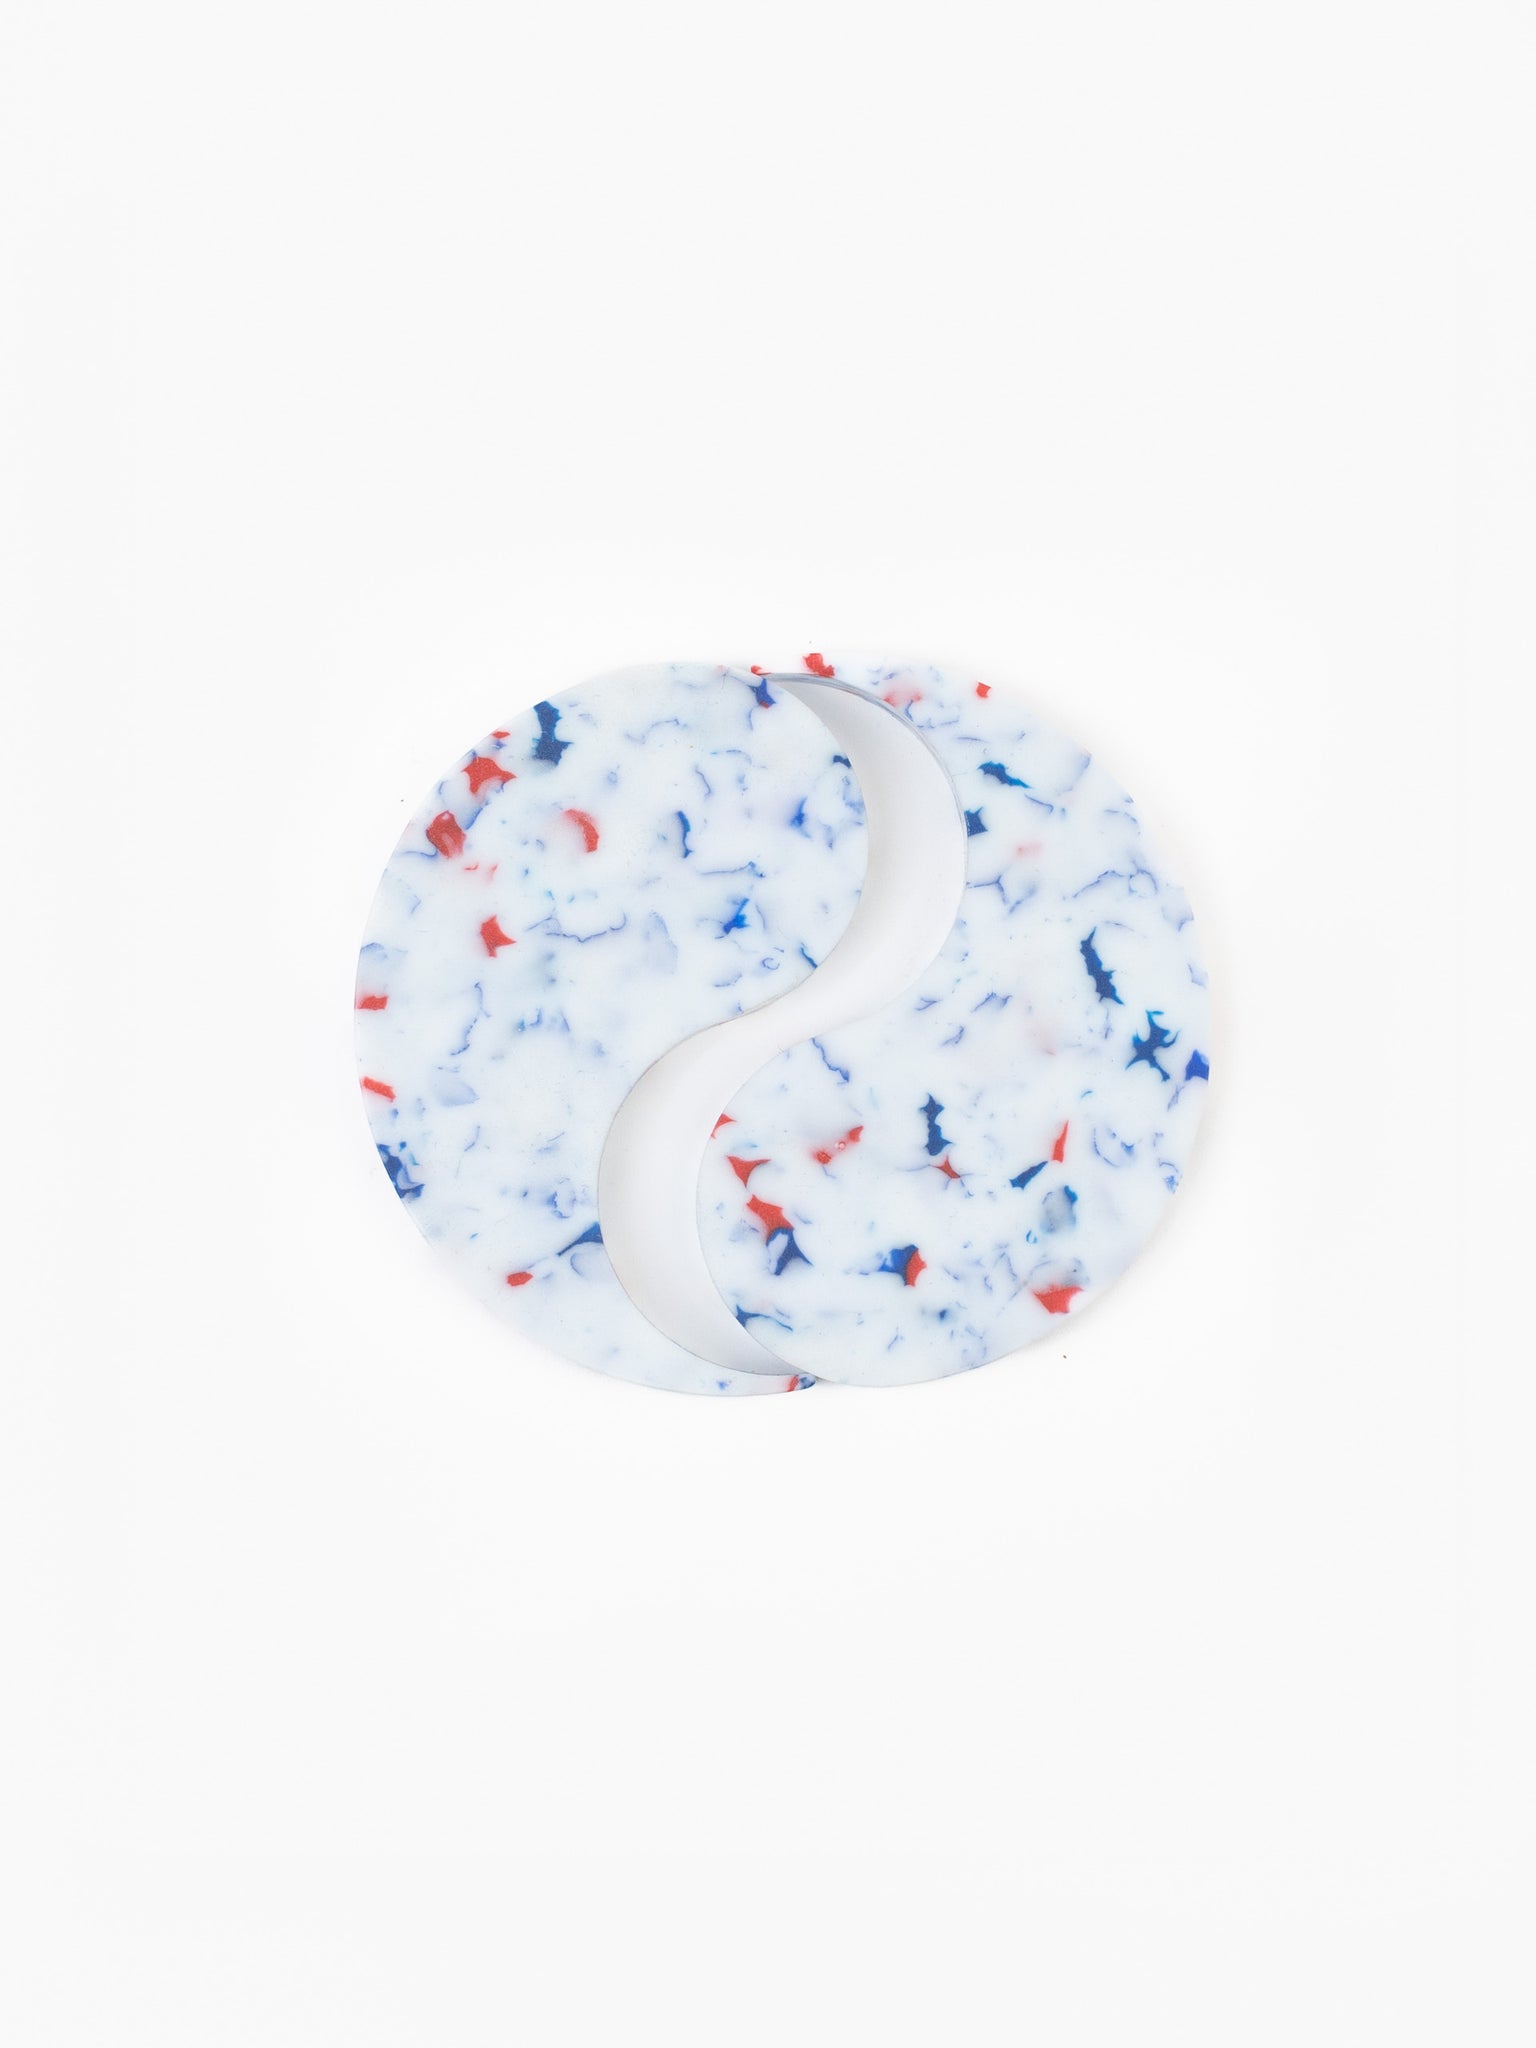 Dualism Recycled Plastic Coasters Set of 4 White